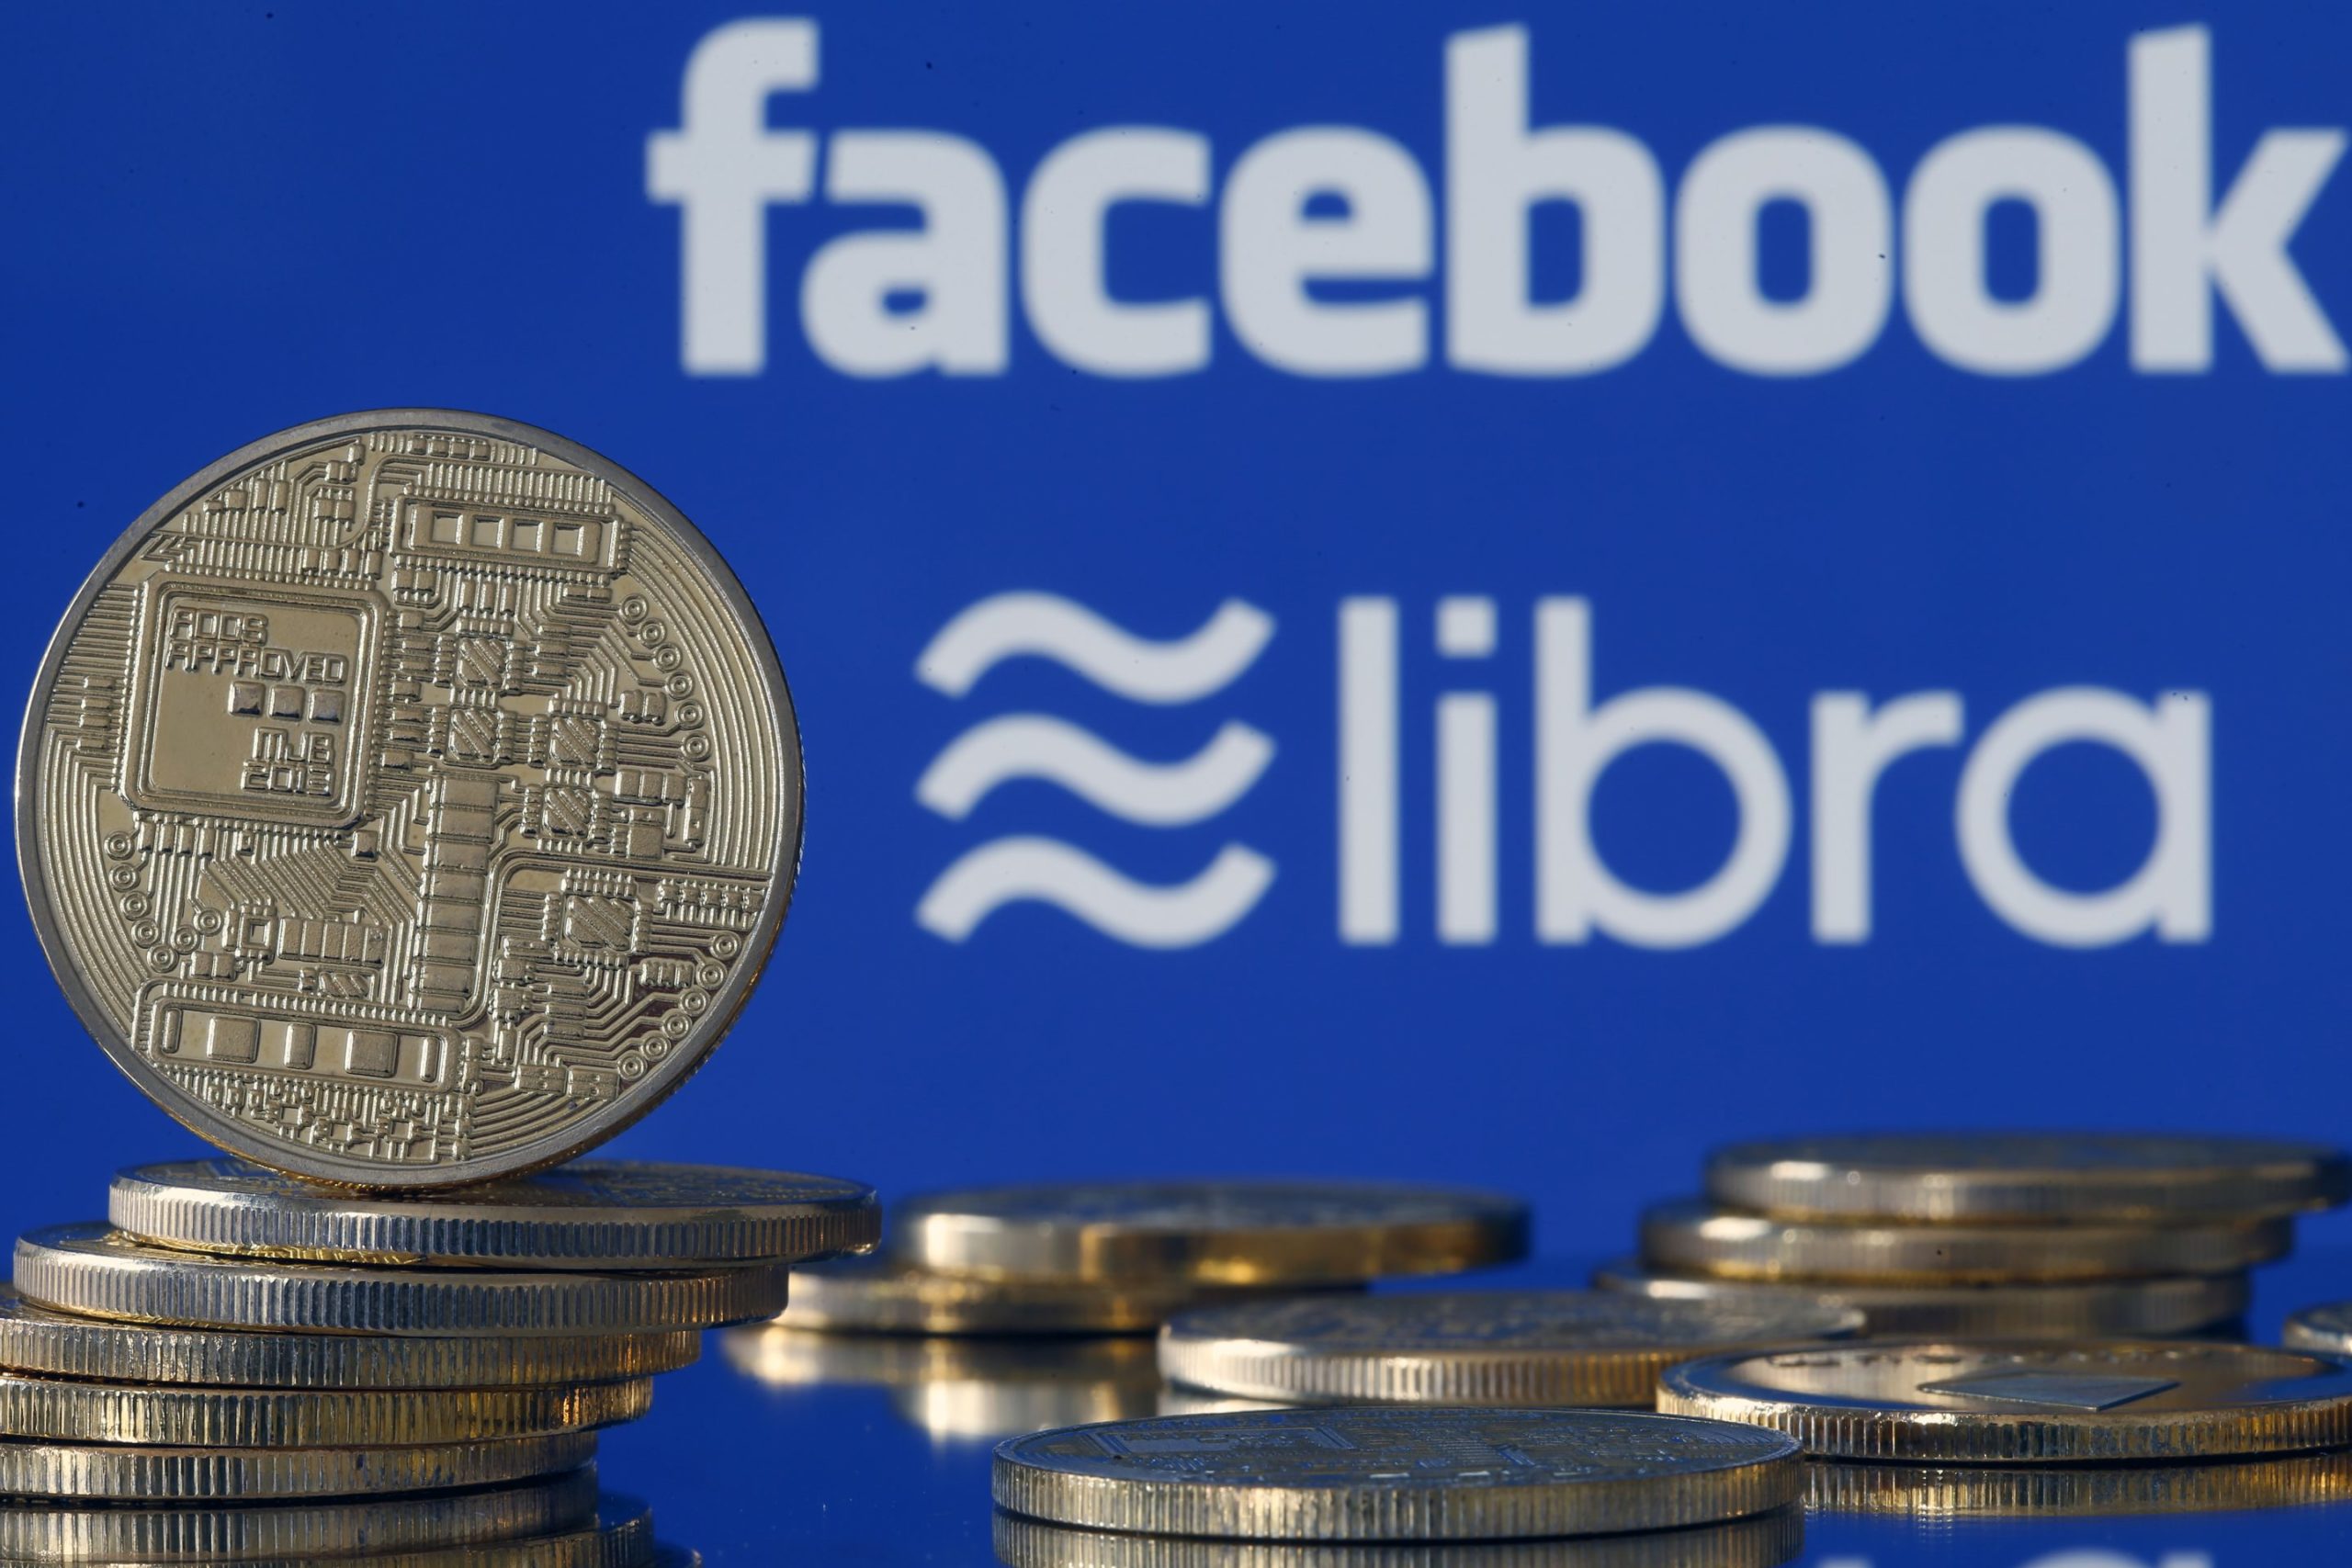 TechCabal Daily - Vodafone Exits Facebook's Libra Cryptocurrency